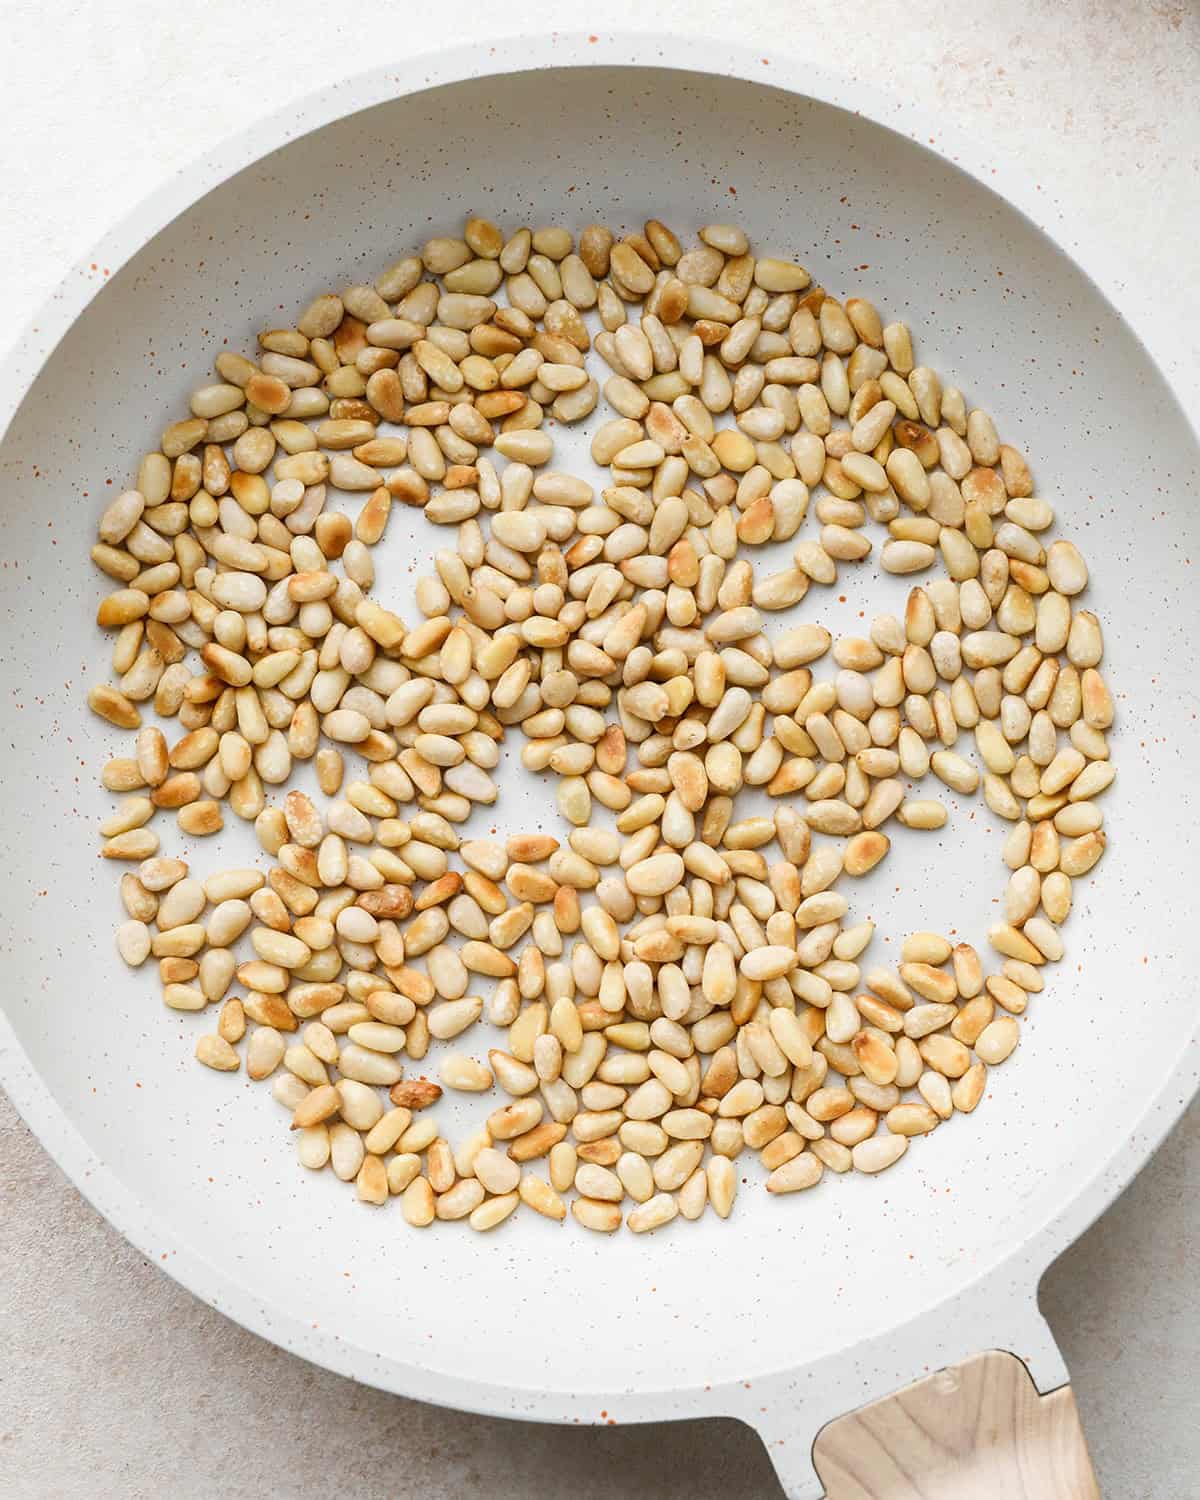 How to Make Pesto Sauce - toasted pine nuts in a pan